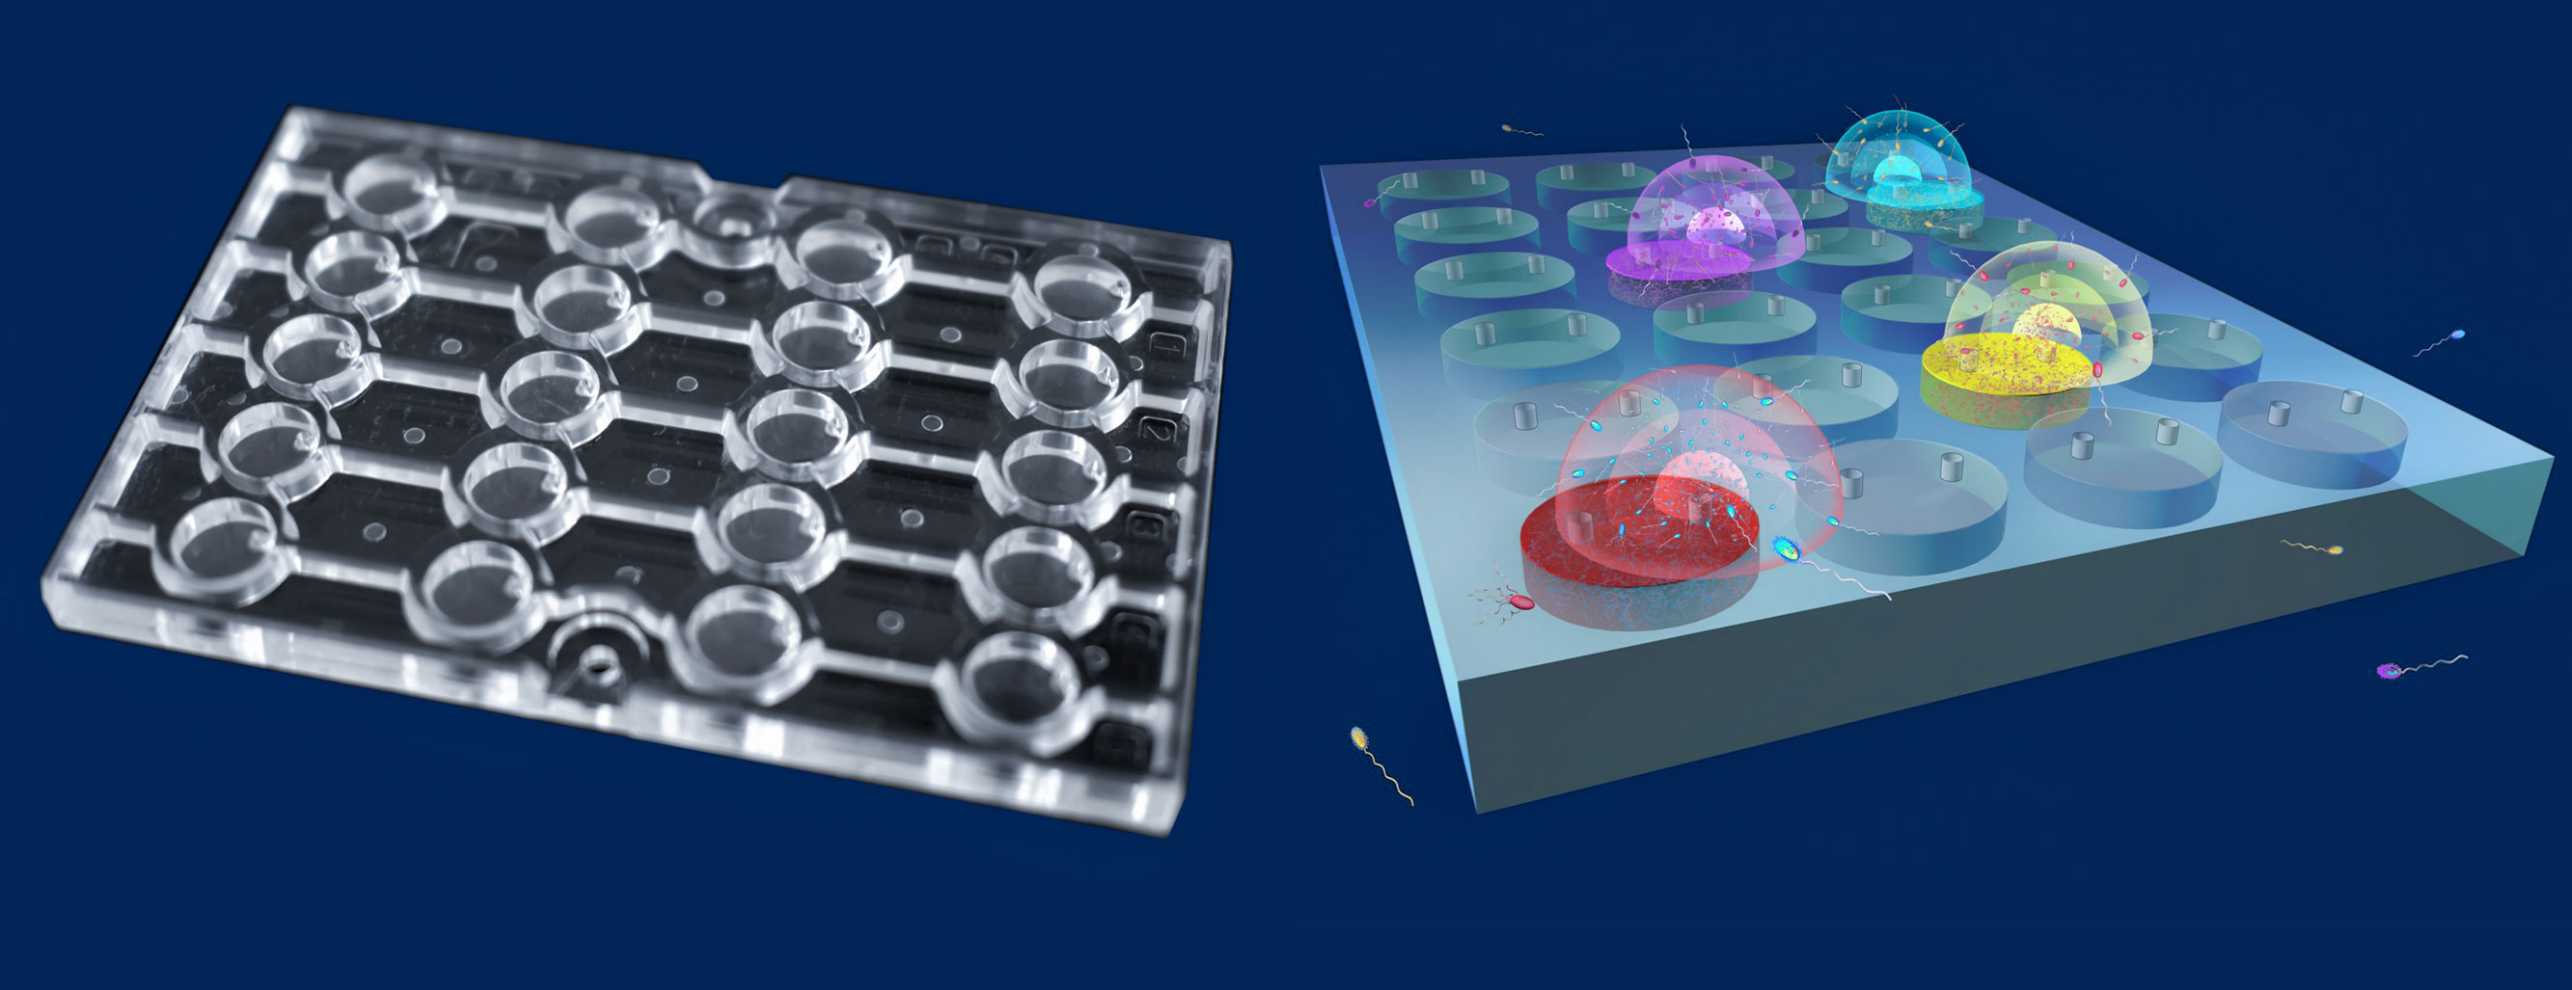 Left: a microfluidic chip. Right: Using the microfluidic chip to test how and whether microbes react to certain substances.